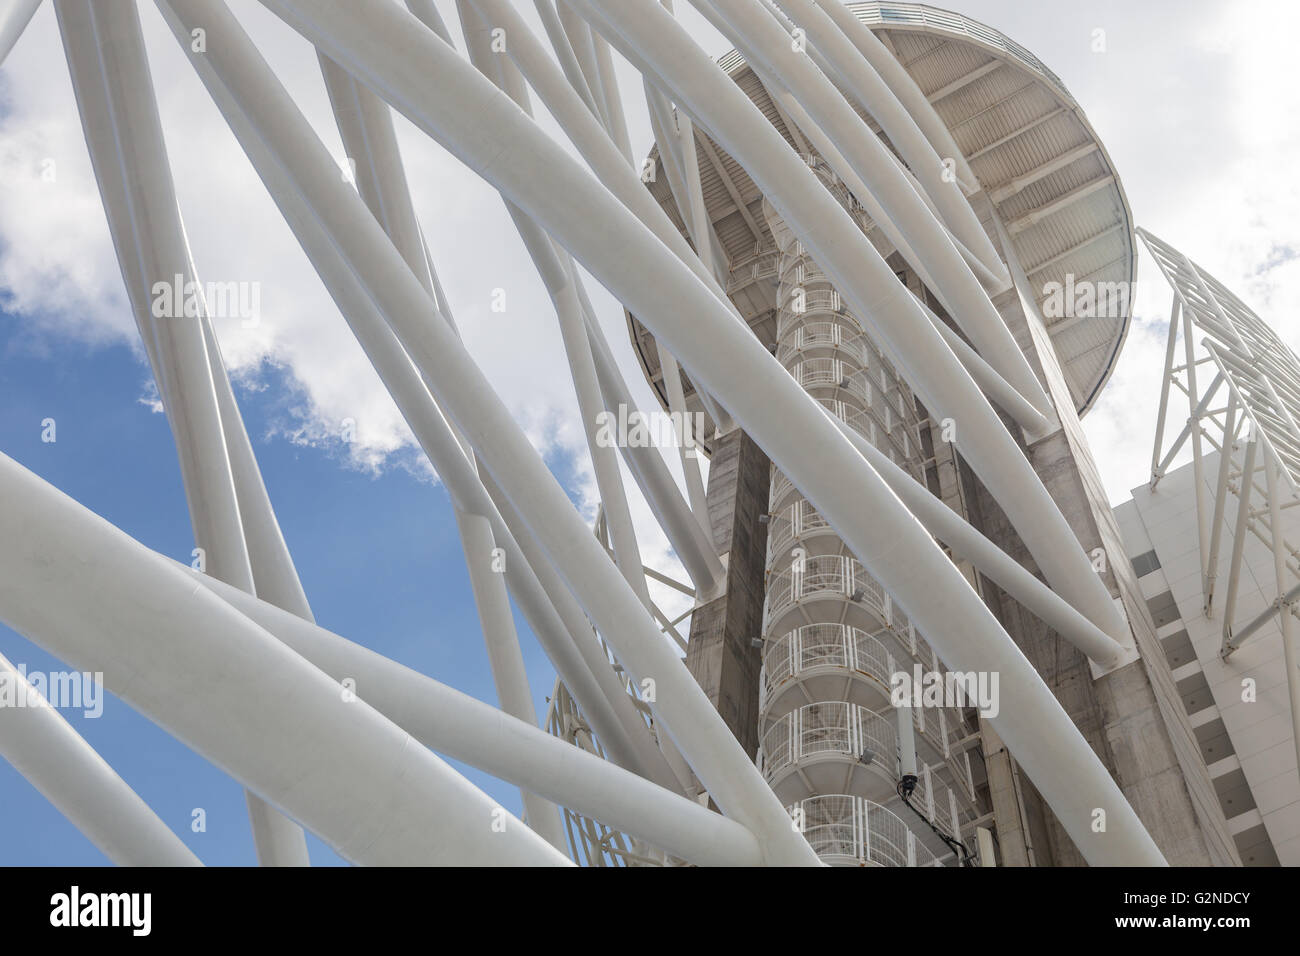 abstract architecture building with metal tubes Stock Photo